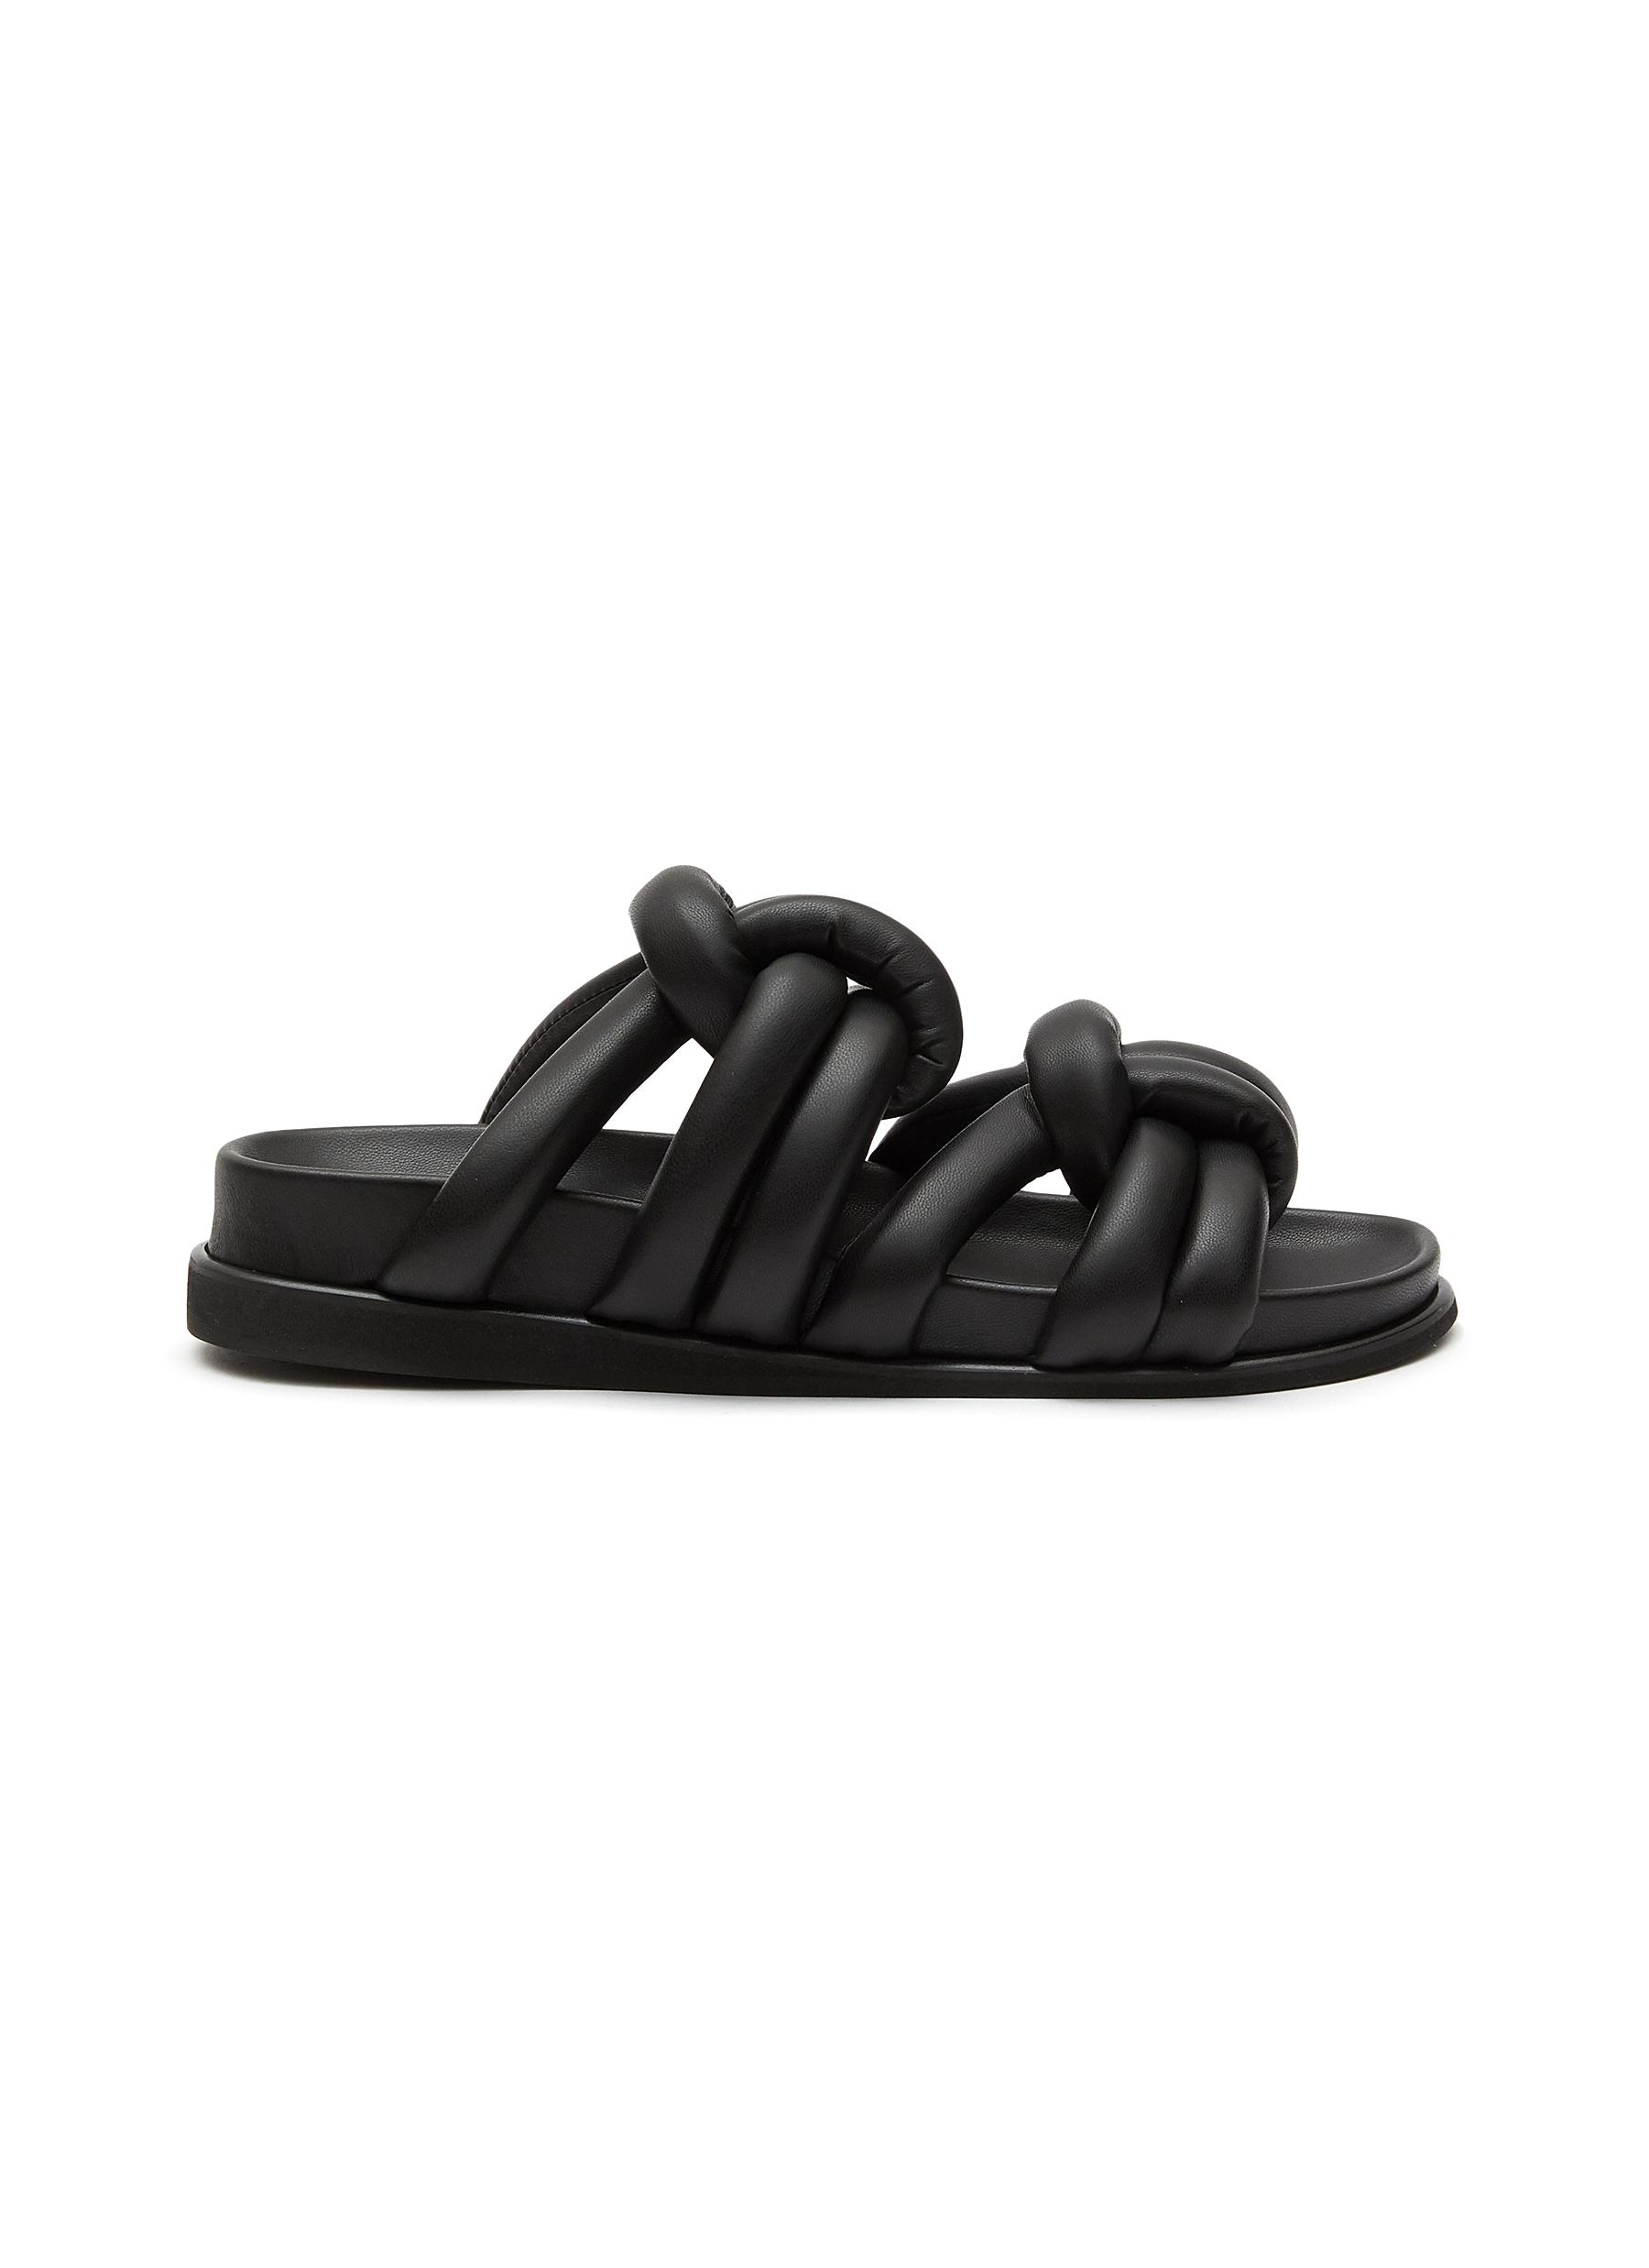 AERA ‘ANNA' DOUBLE KNOT NAPPA EFFECT VEGAN LEATHER SANDALS